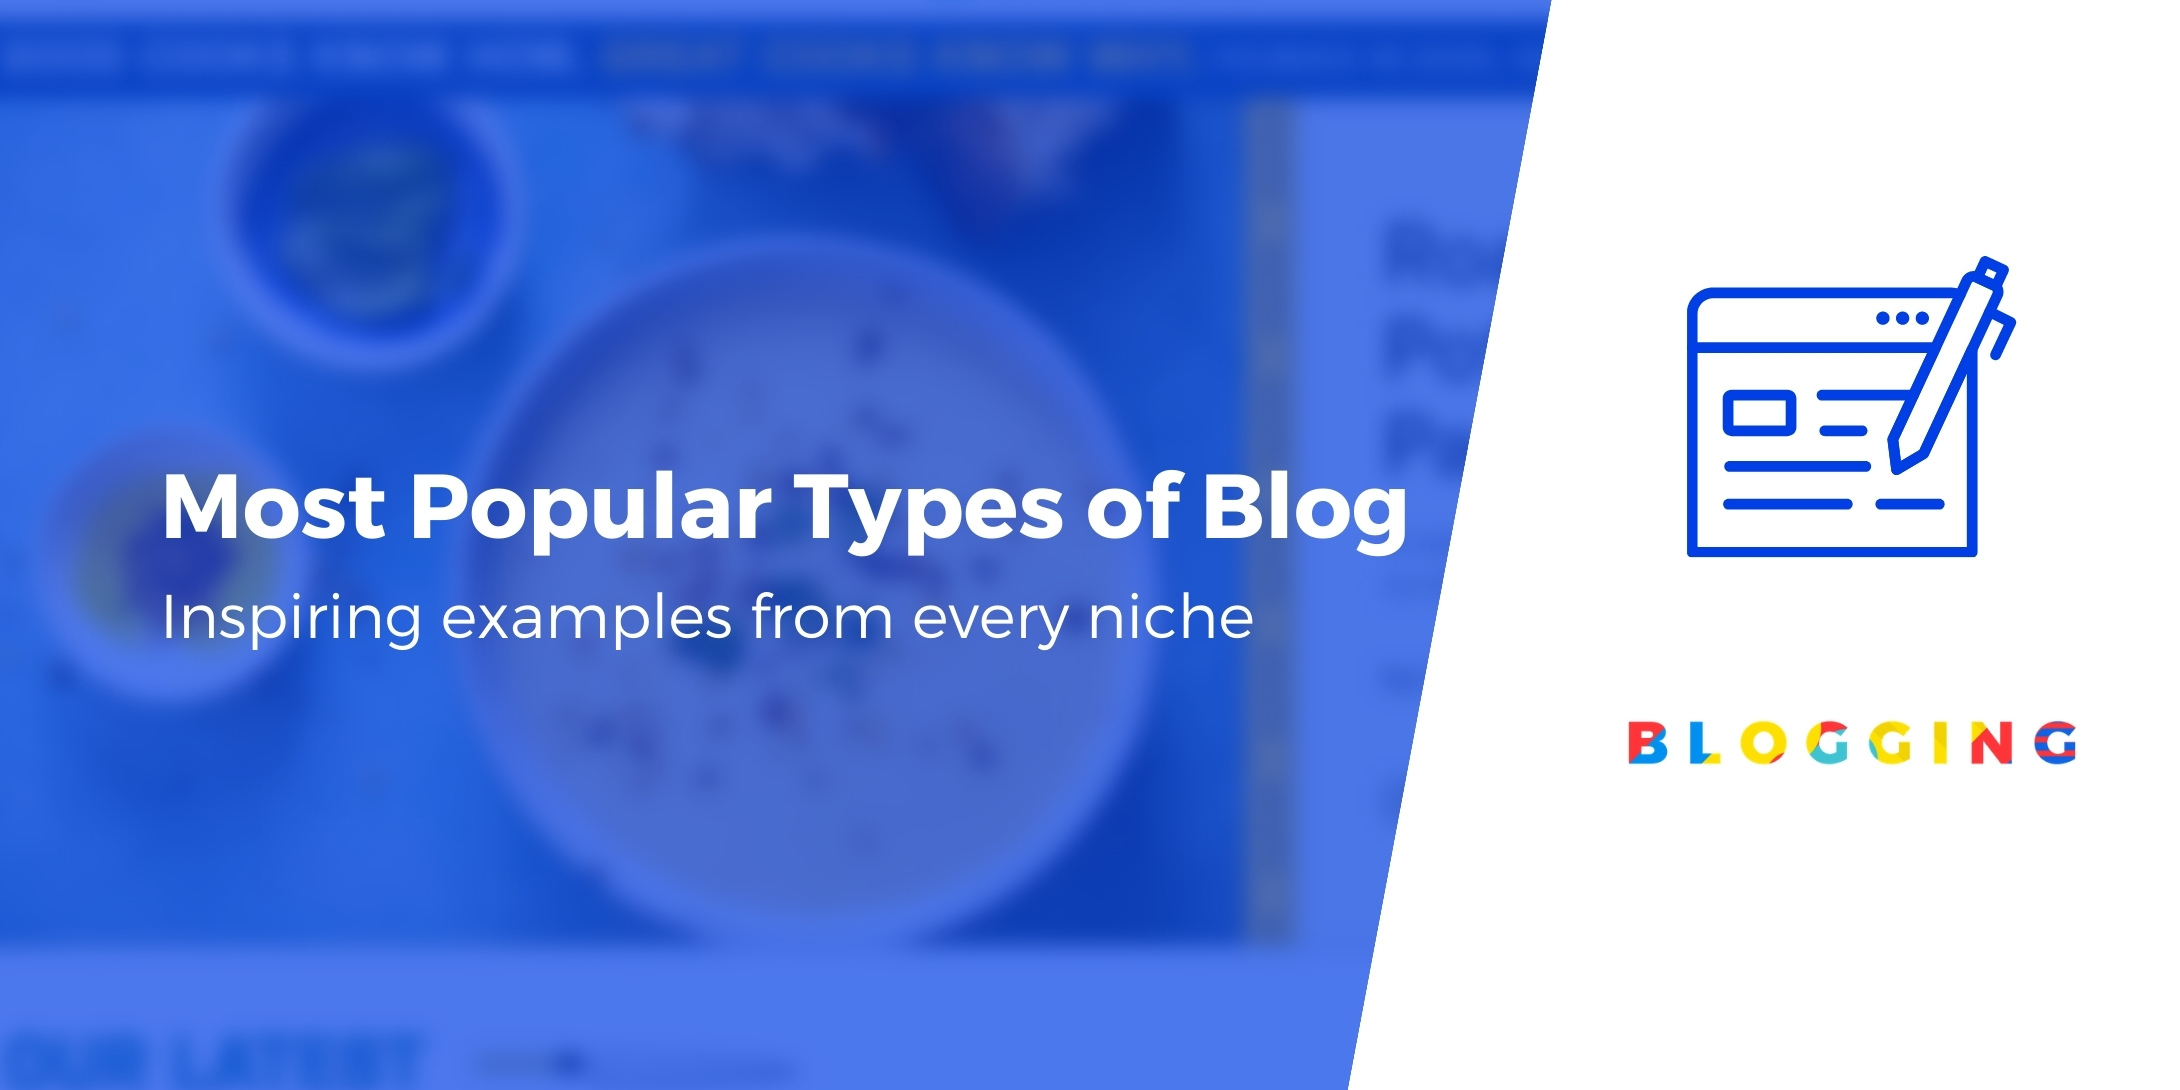 Why blogging is so popular